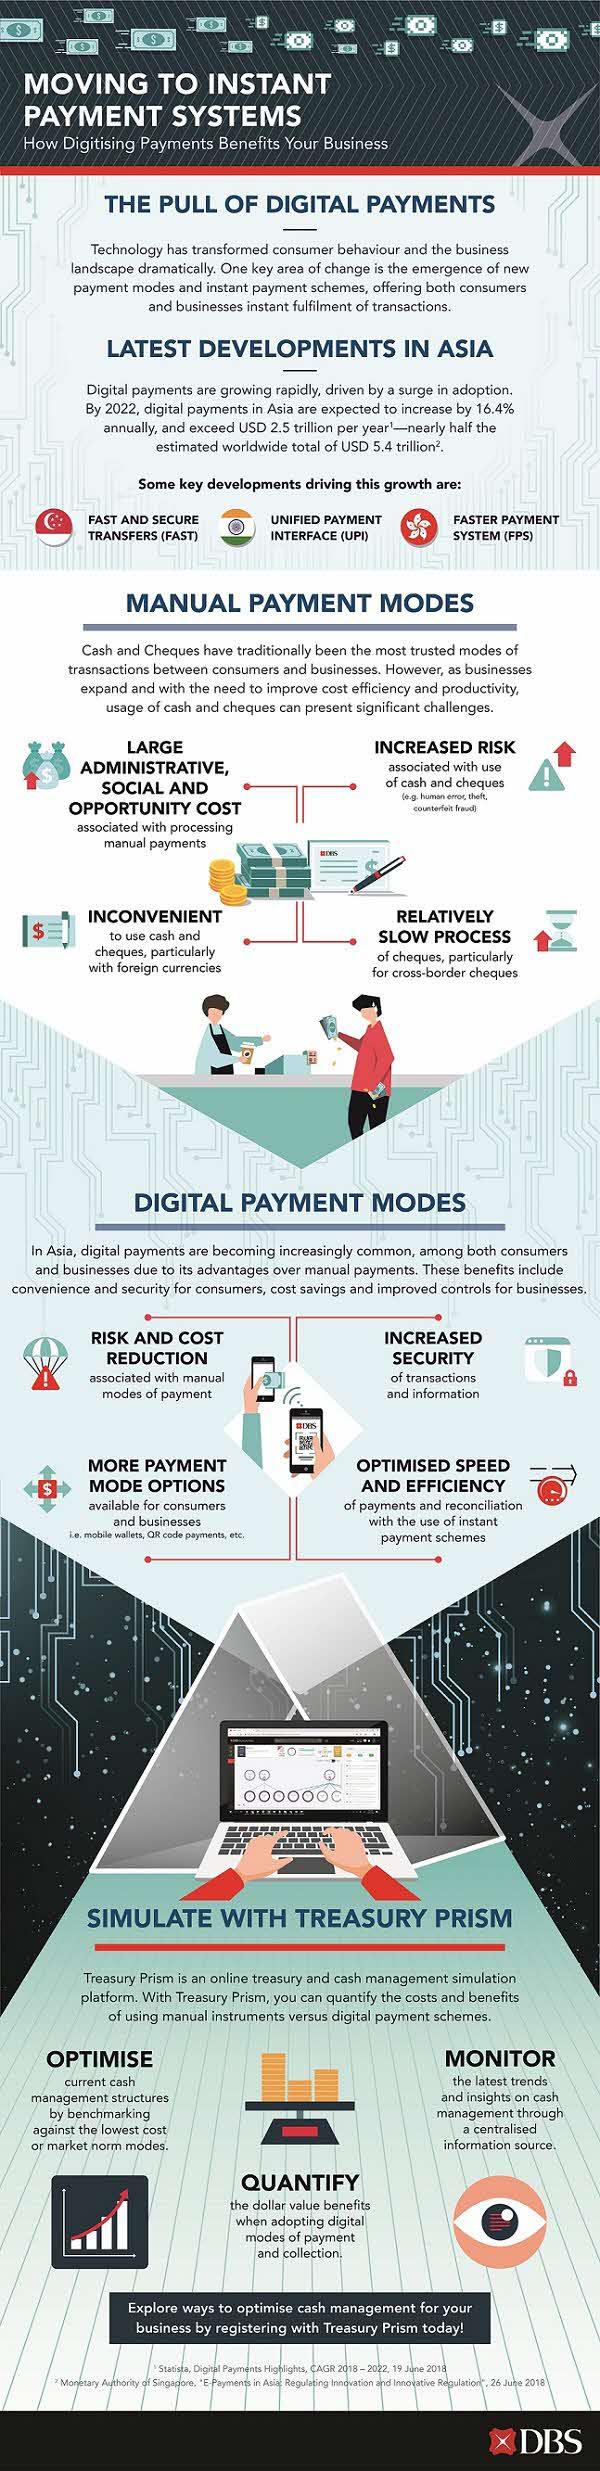 Digital Payments features and benefits